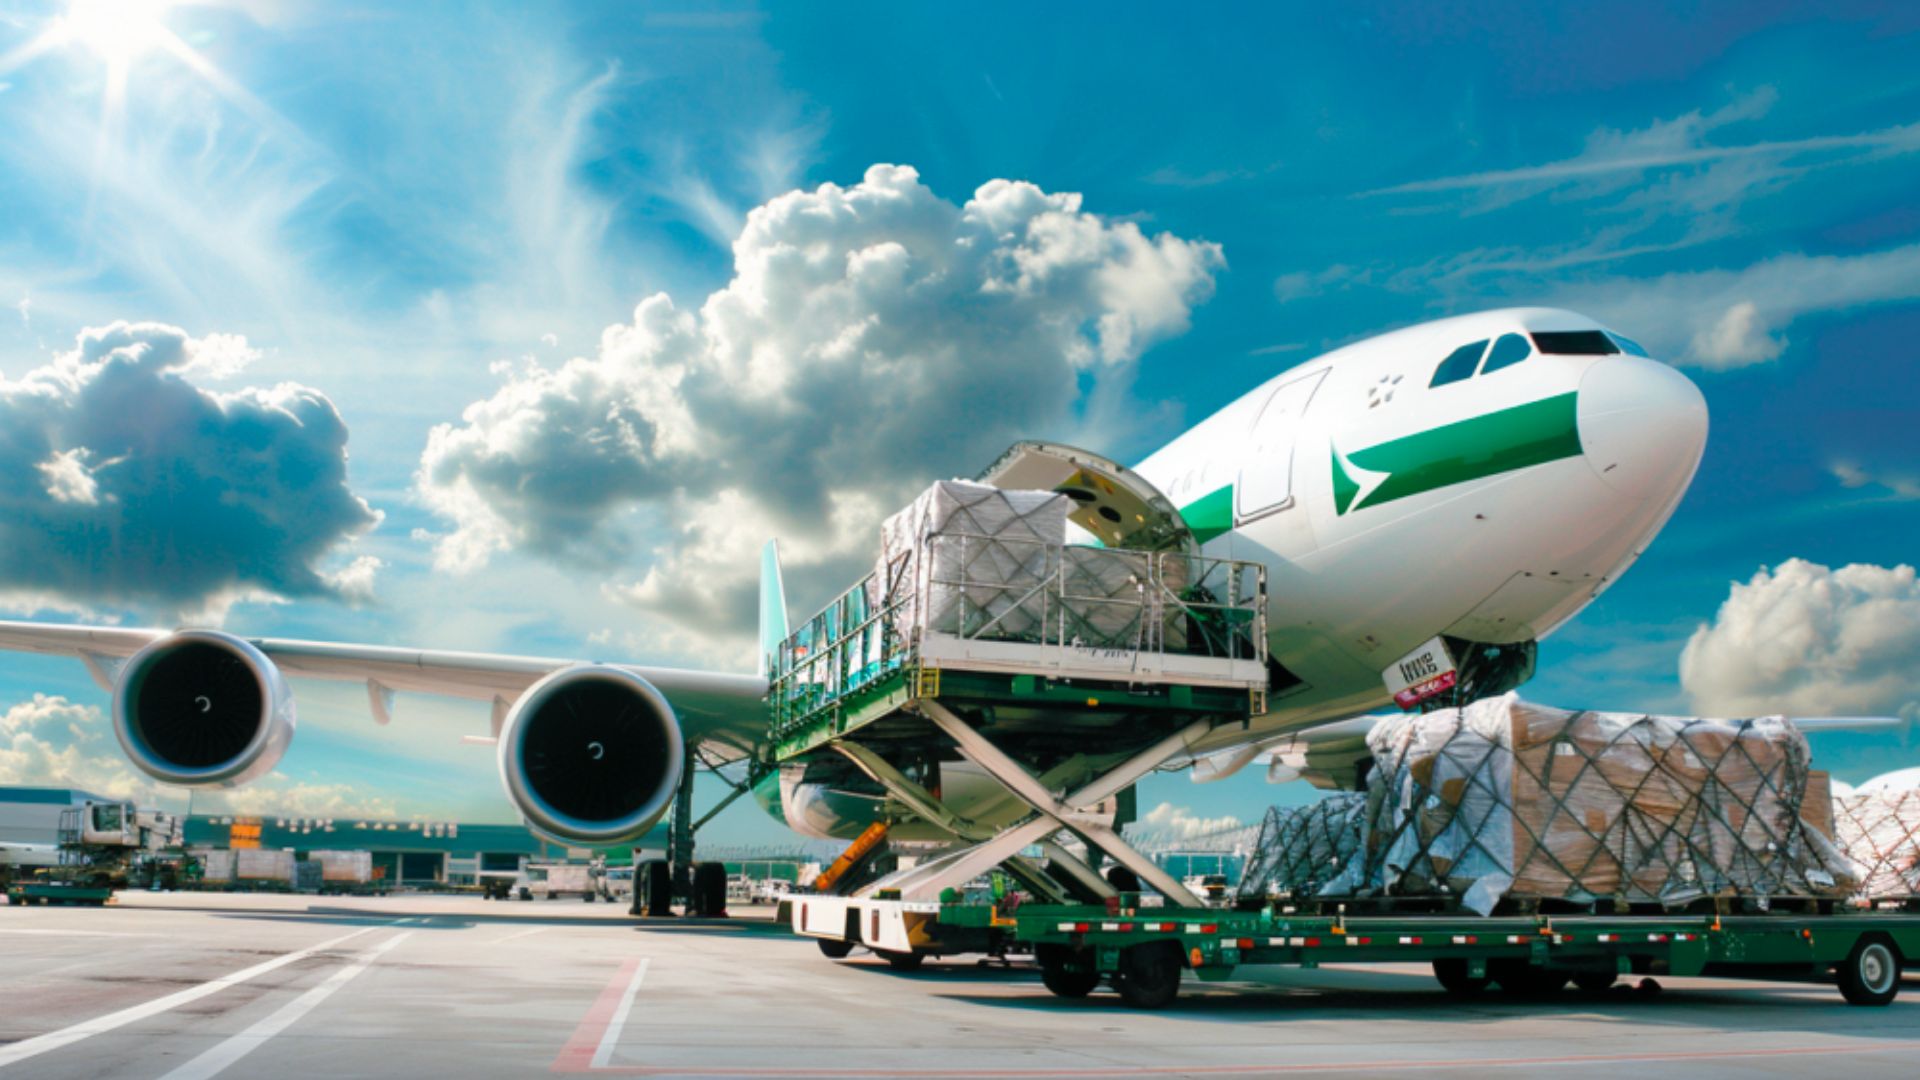 A cargo plane is being loaded with large bundles of goods at the airport, highlighting the efficiency of air cargo operations. The bundles, secured with nets, are transferred from a green and white loading vehicle. The sky is bright with scattered clouds in the background, suggesting a greener horizon ahead.